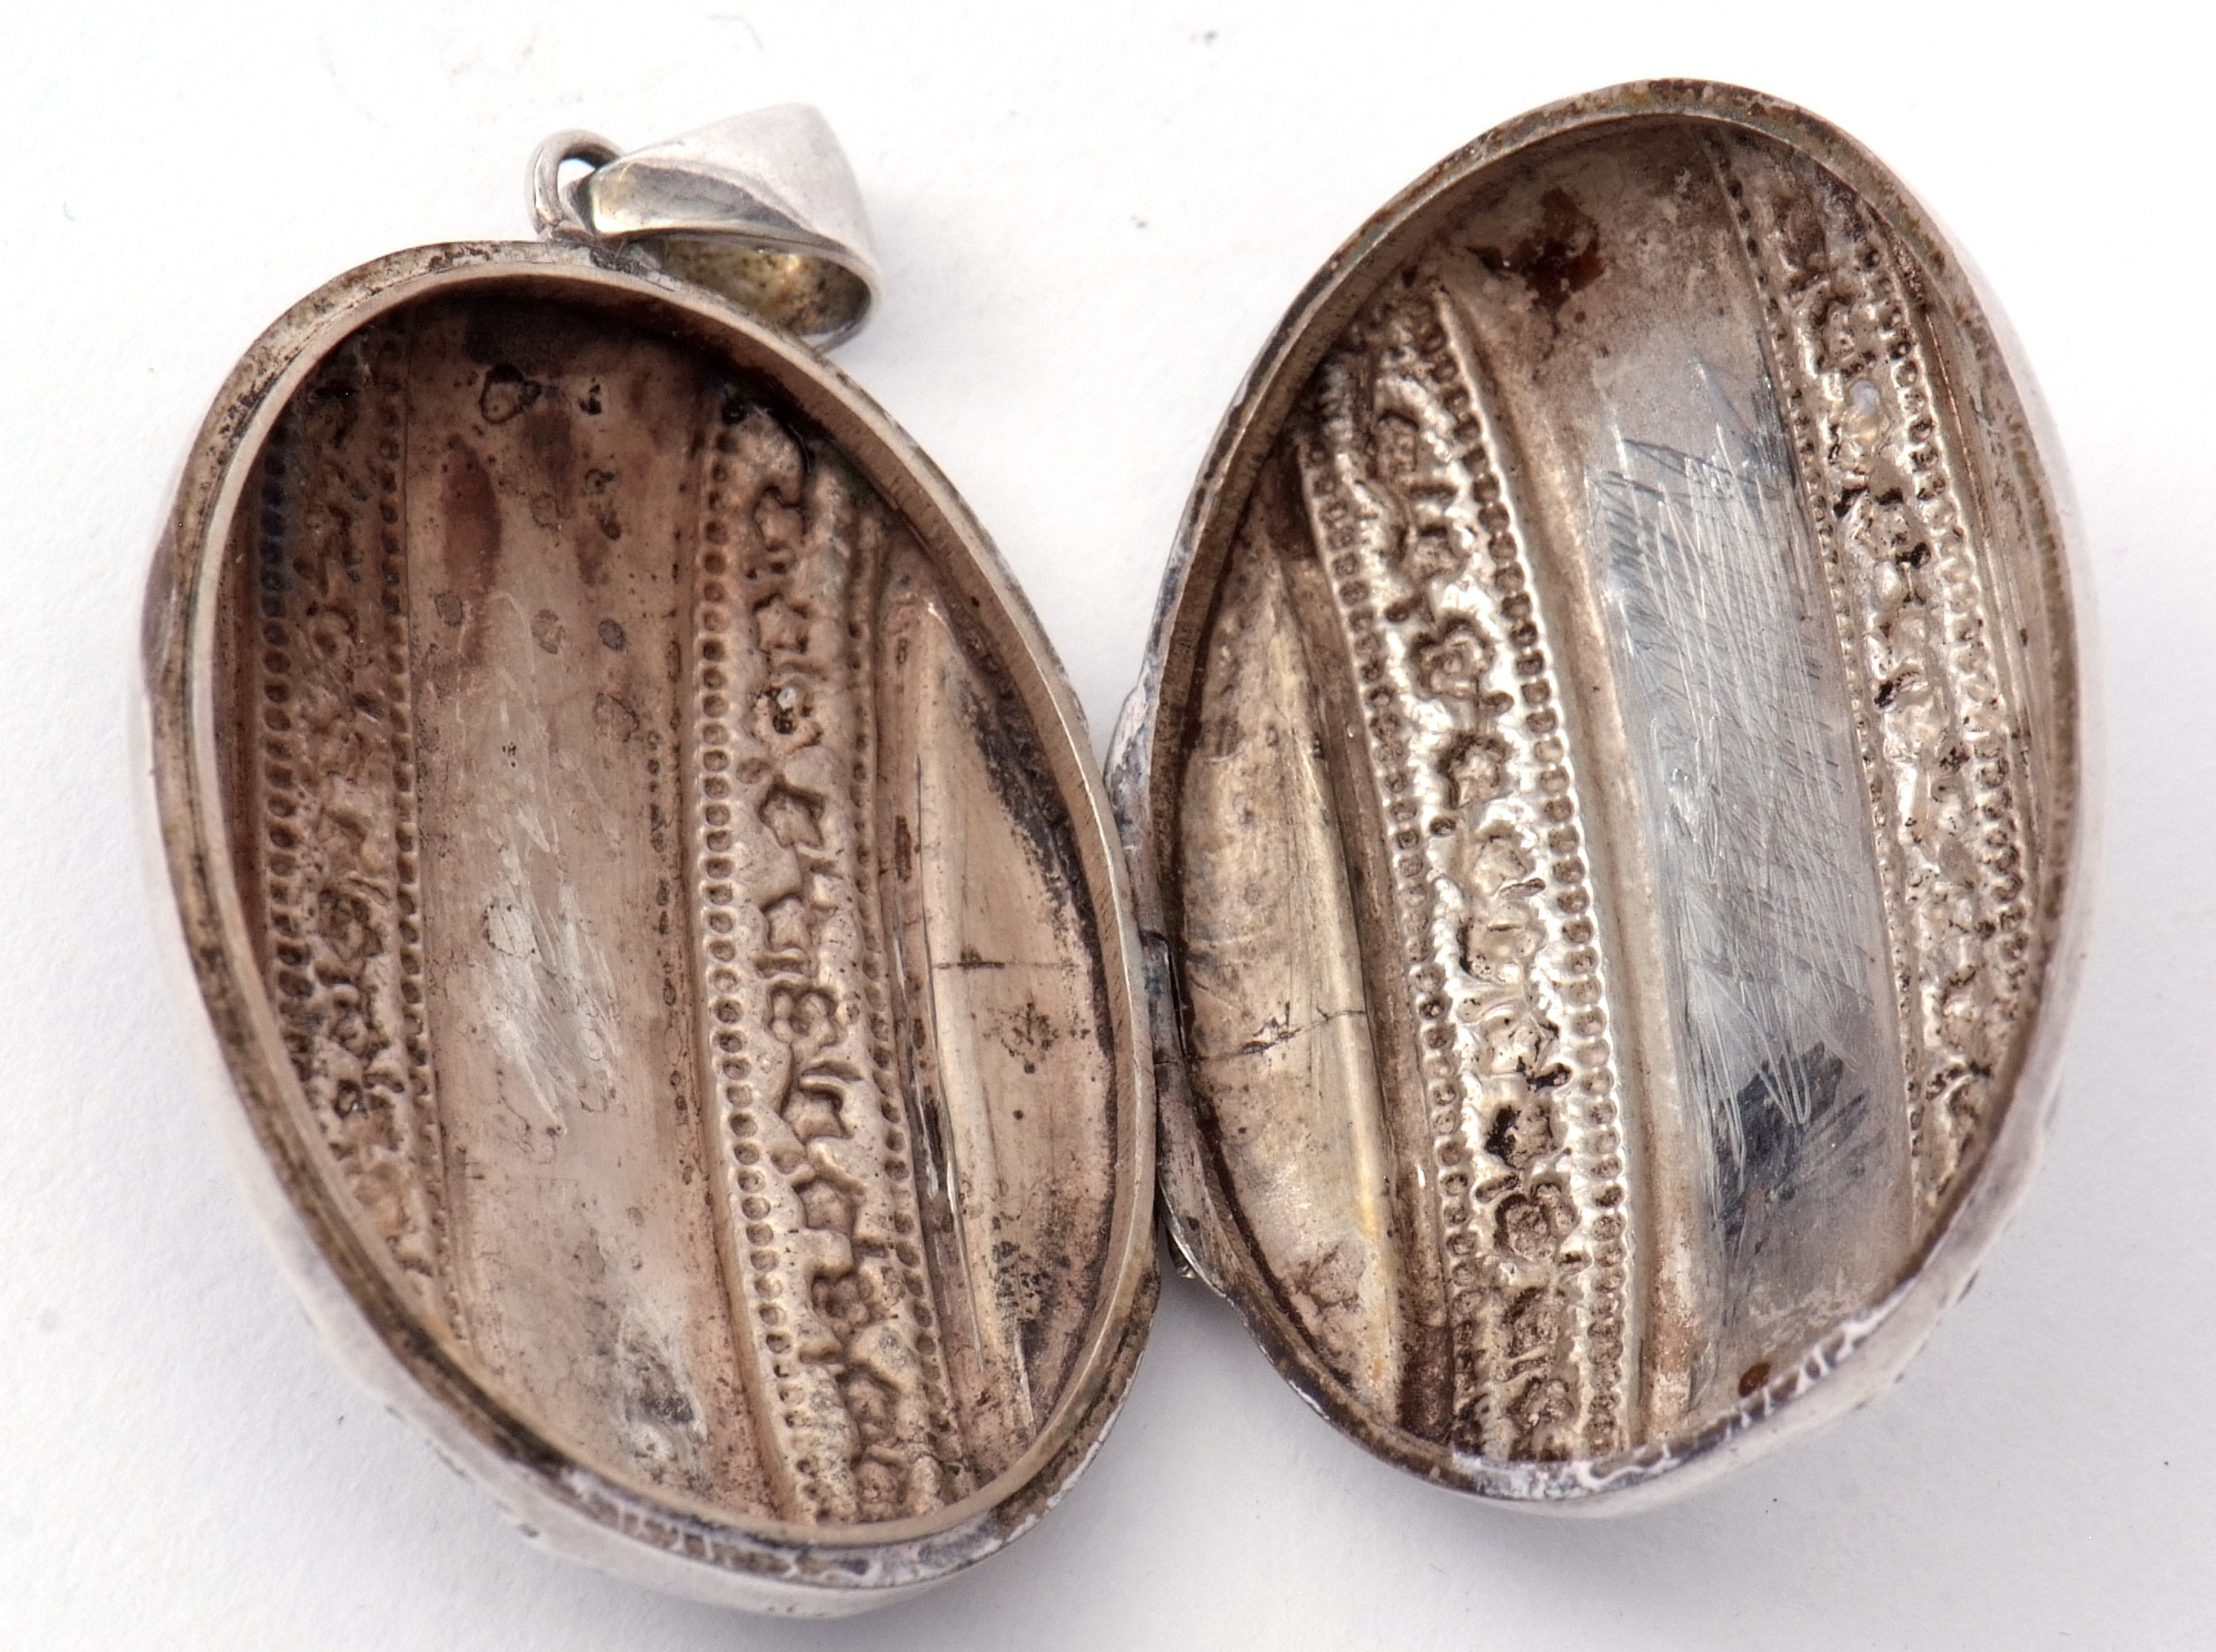 Antique oval plated locket of ribbon design, chased and engraved detail, 4.5 x 3.5cm - Image 3 of 3